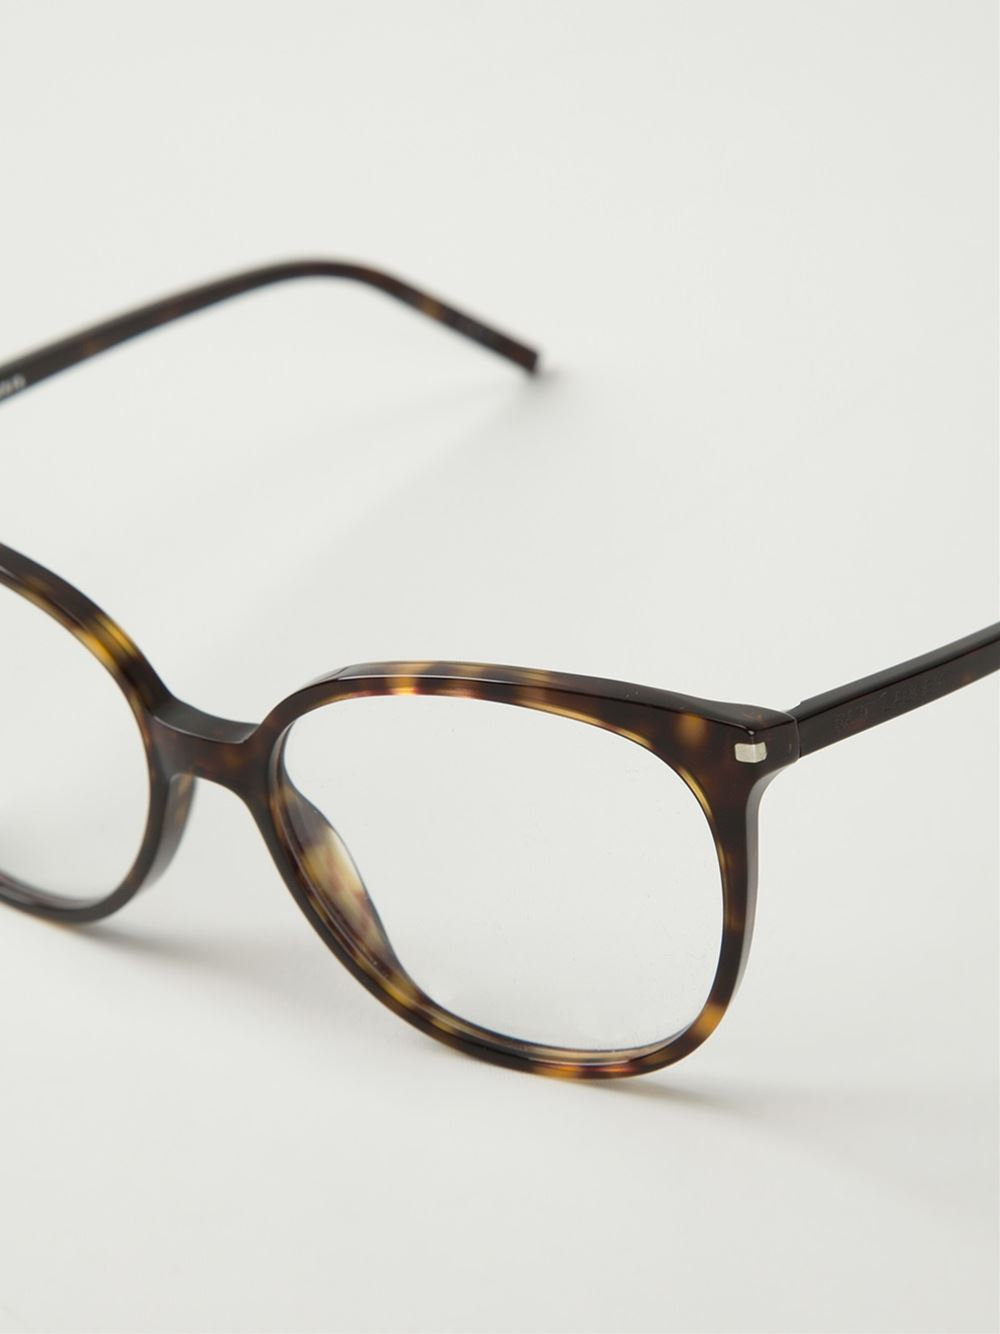 Saint Laurent Square Optical Frames in Brown - Lyst